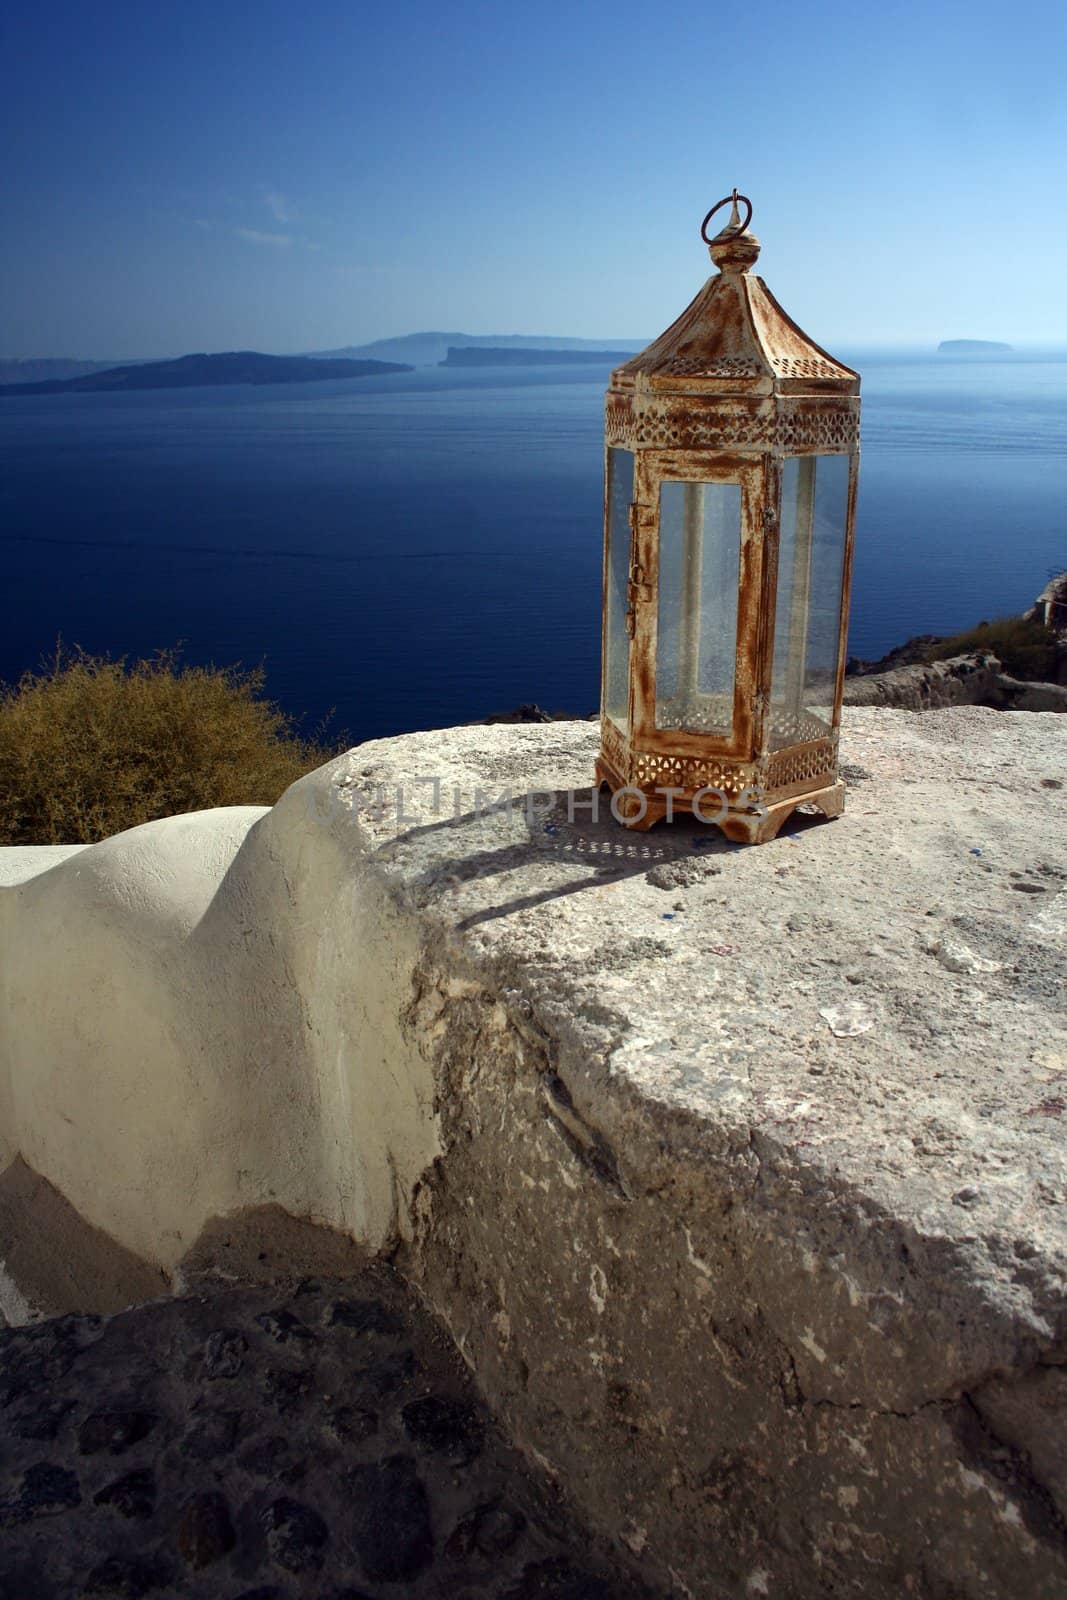 close up with lamp in santorini island